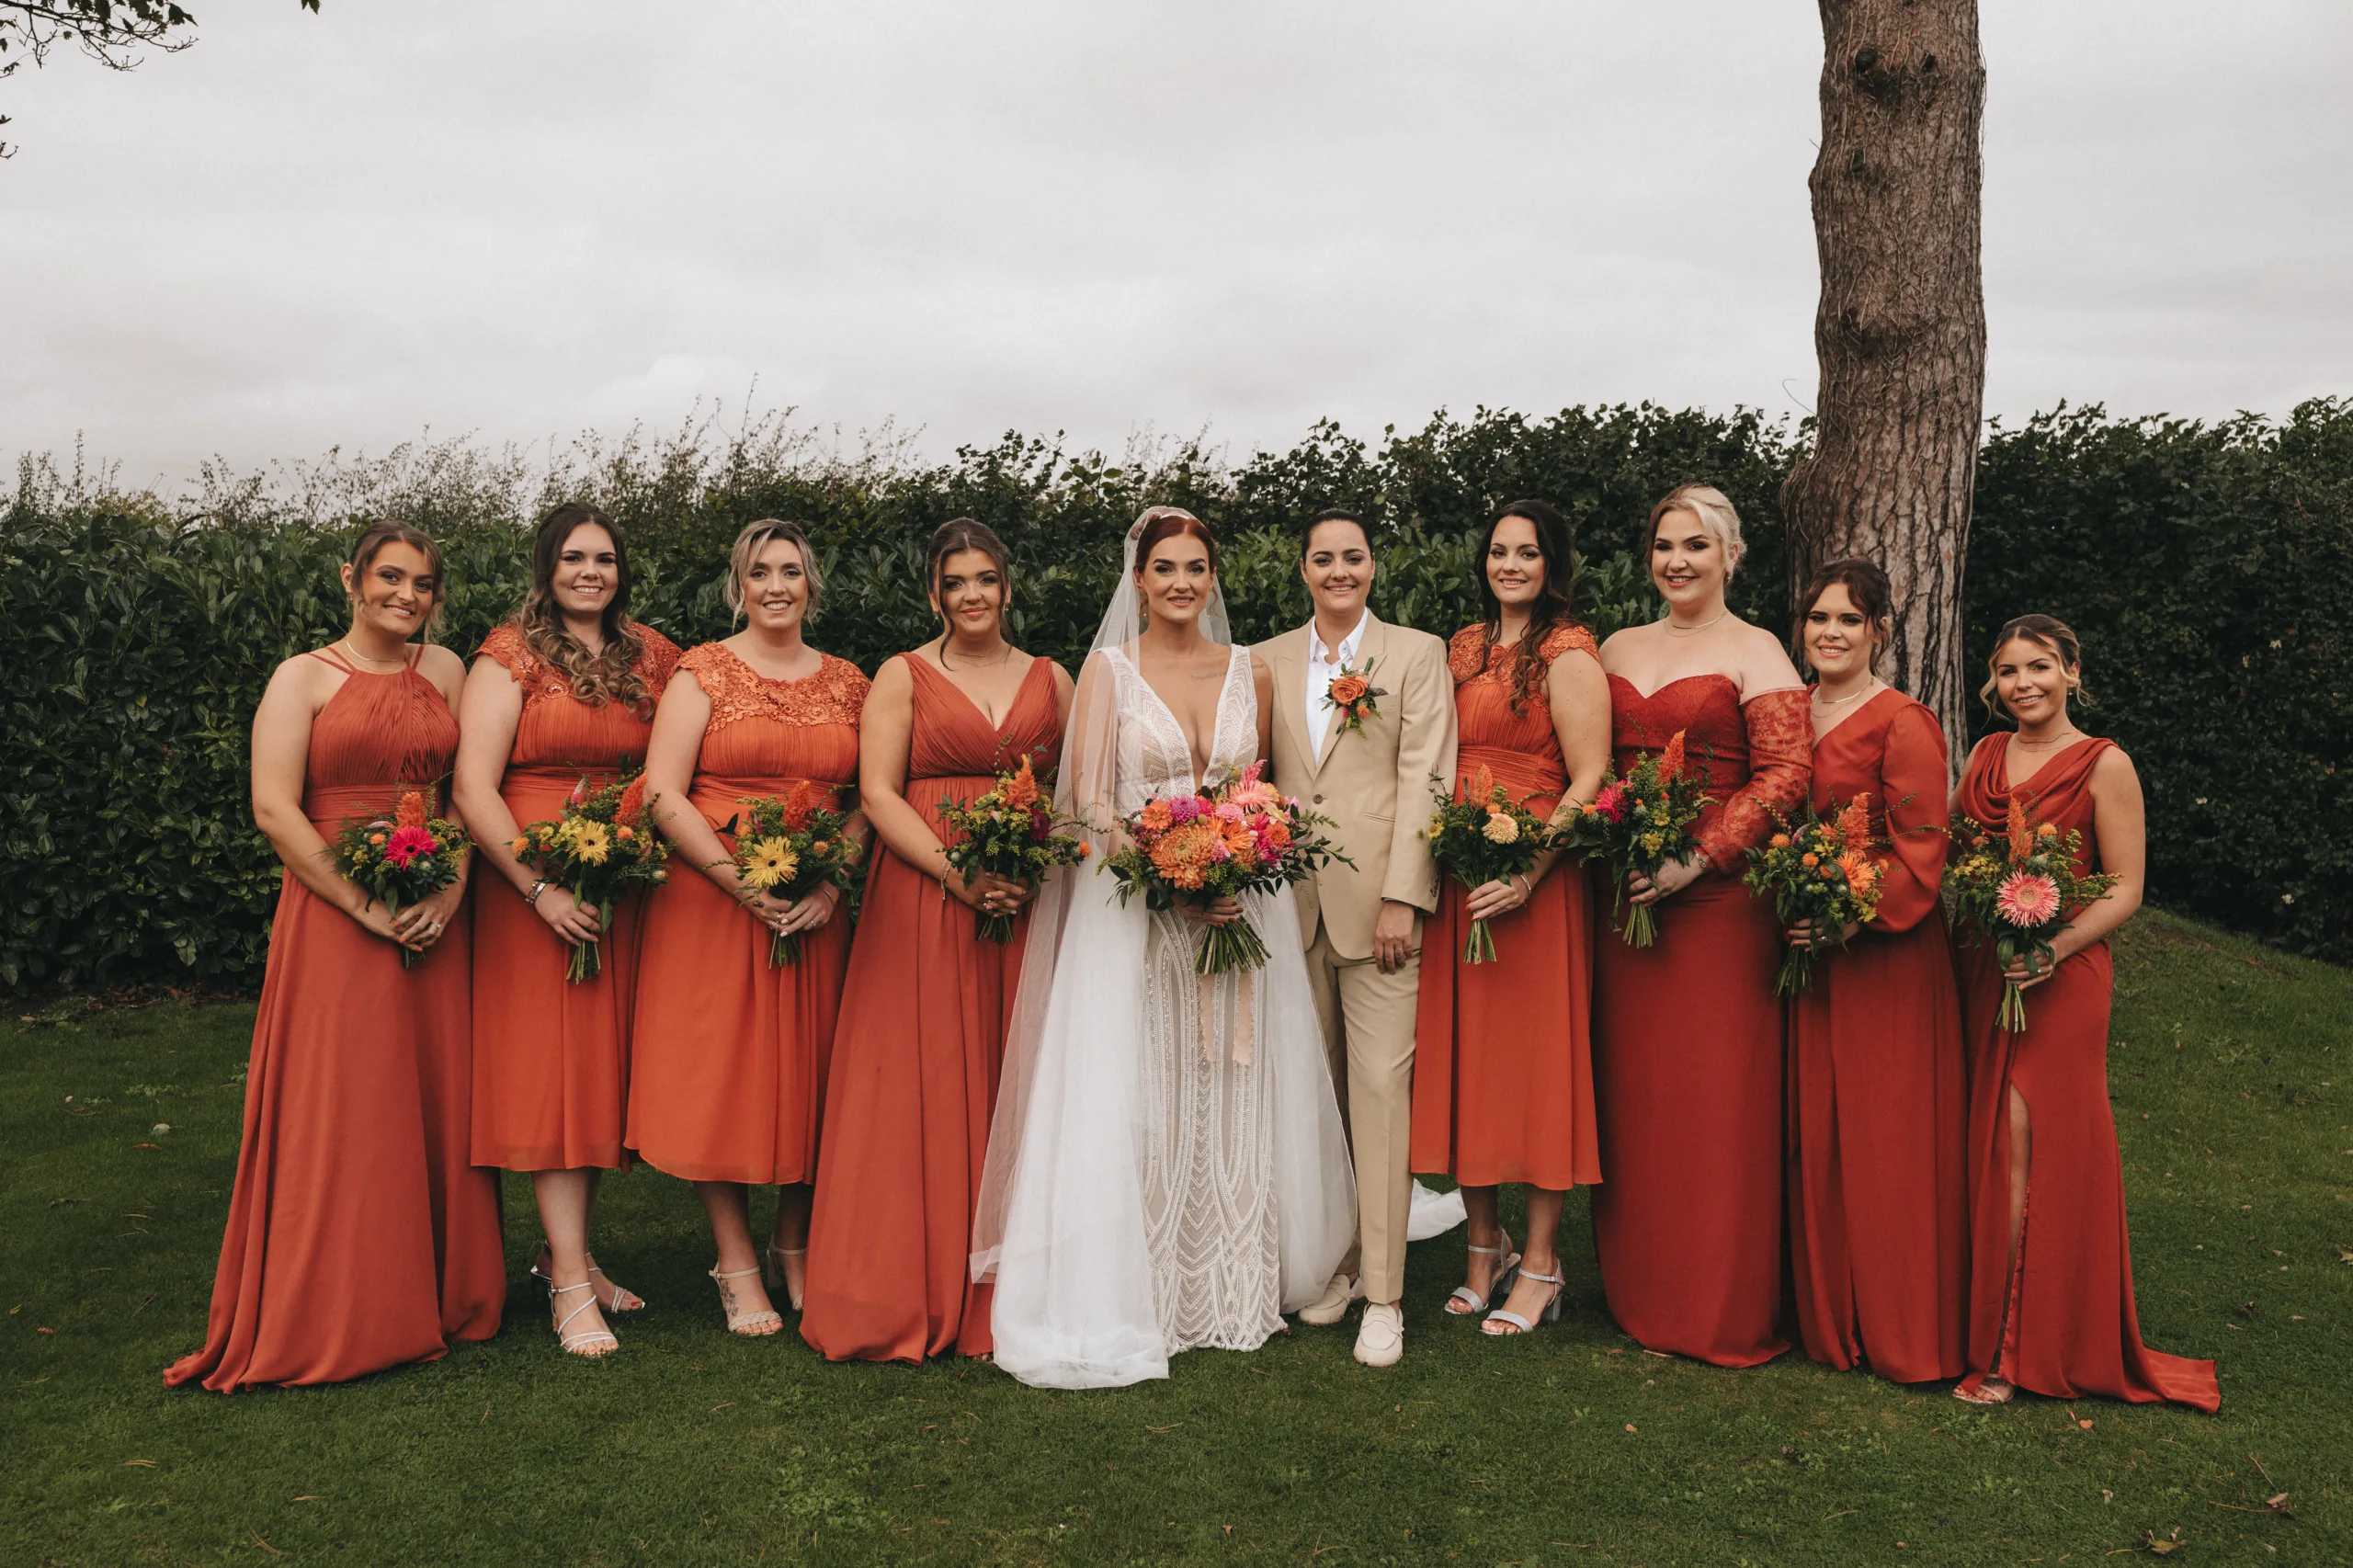 A group of bridesmaids in orange dresses posing for a wedding photo in Yorkshire.